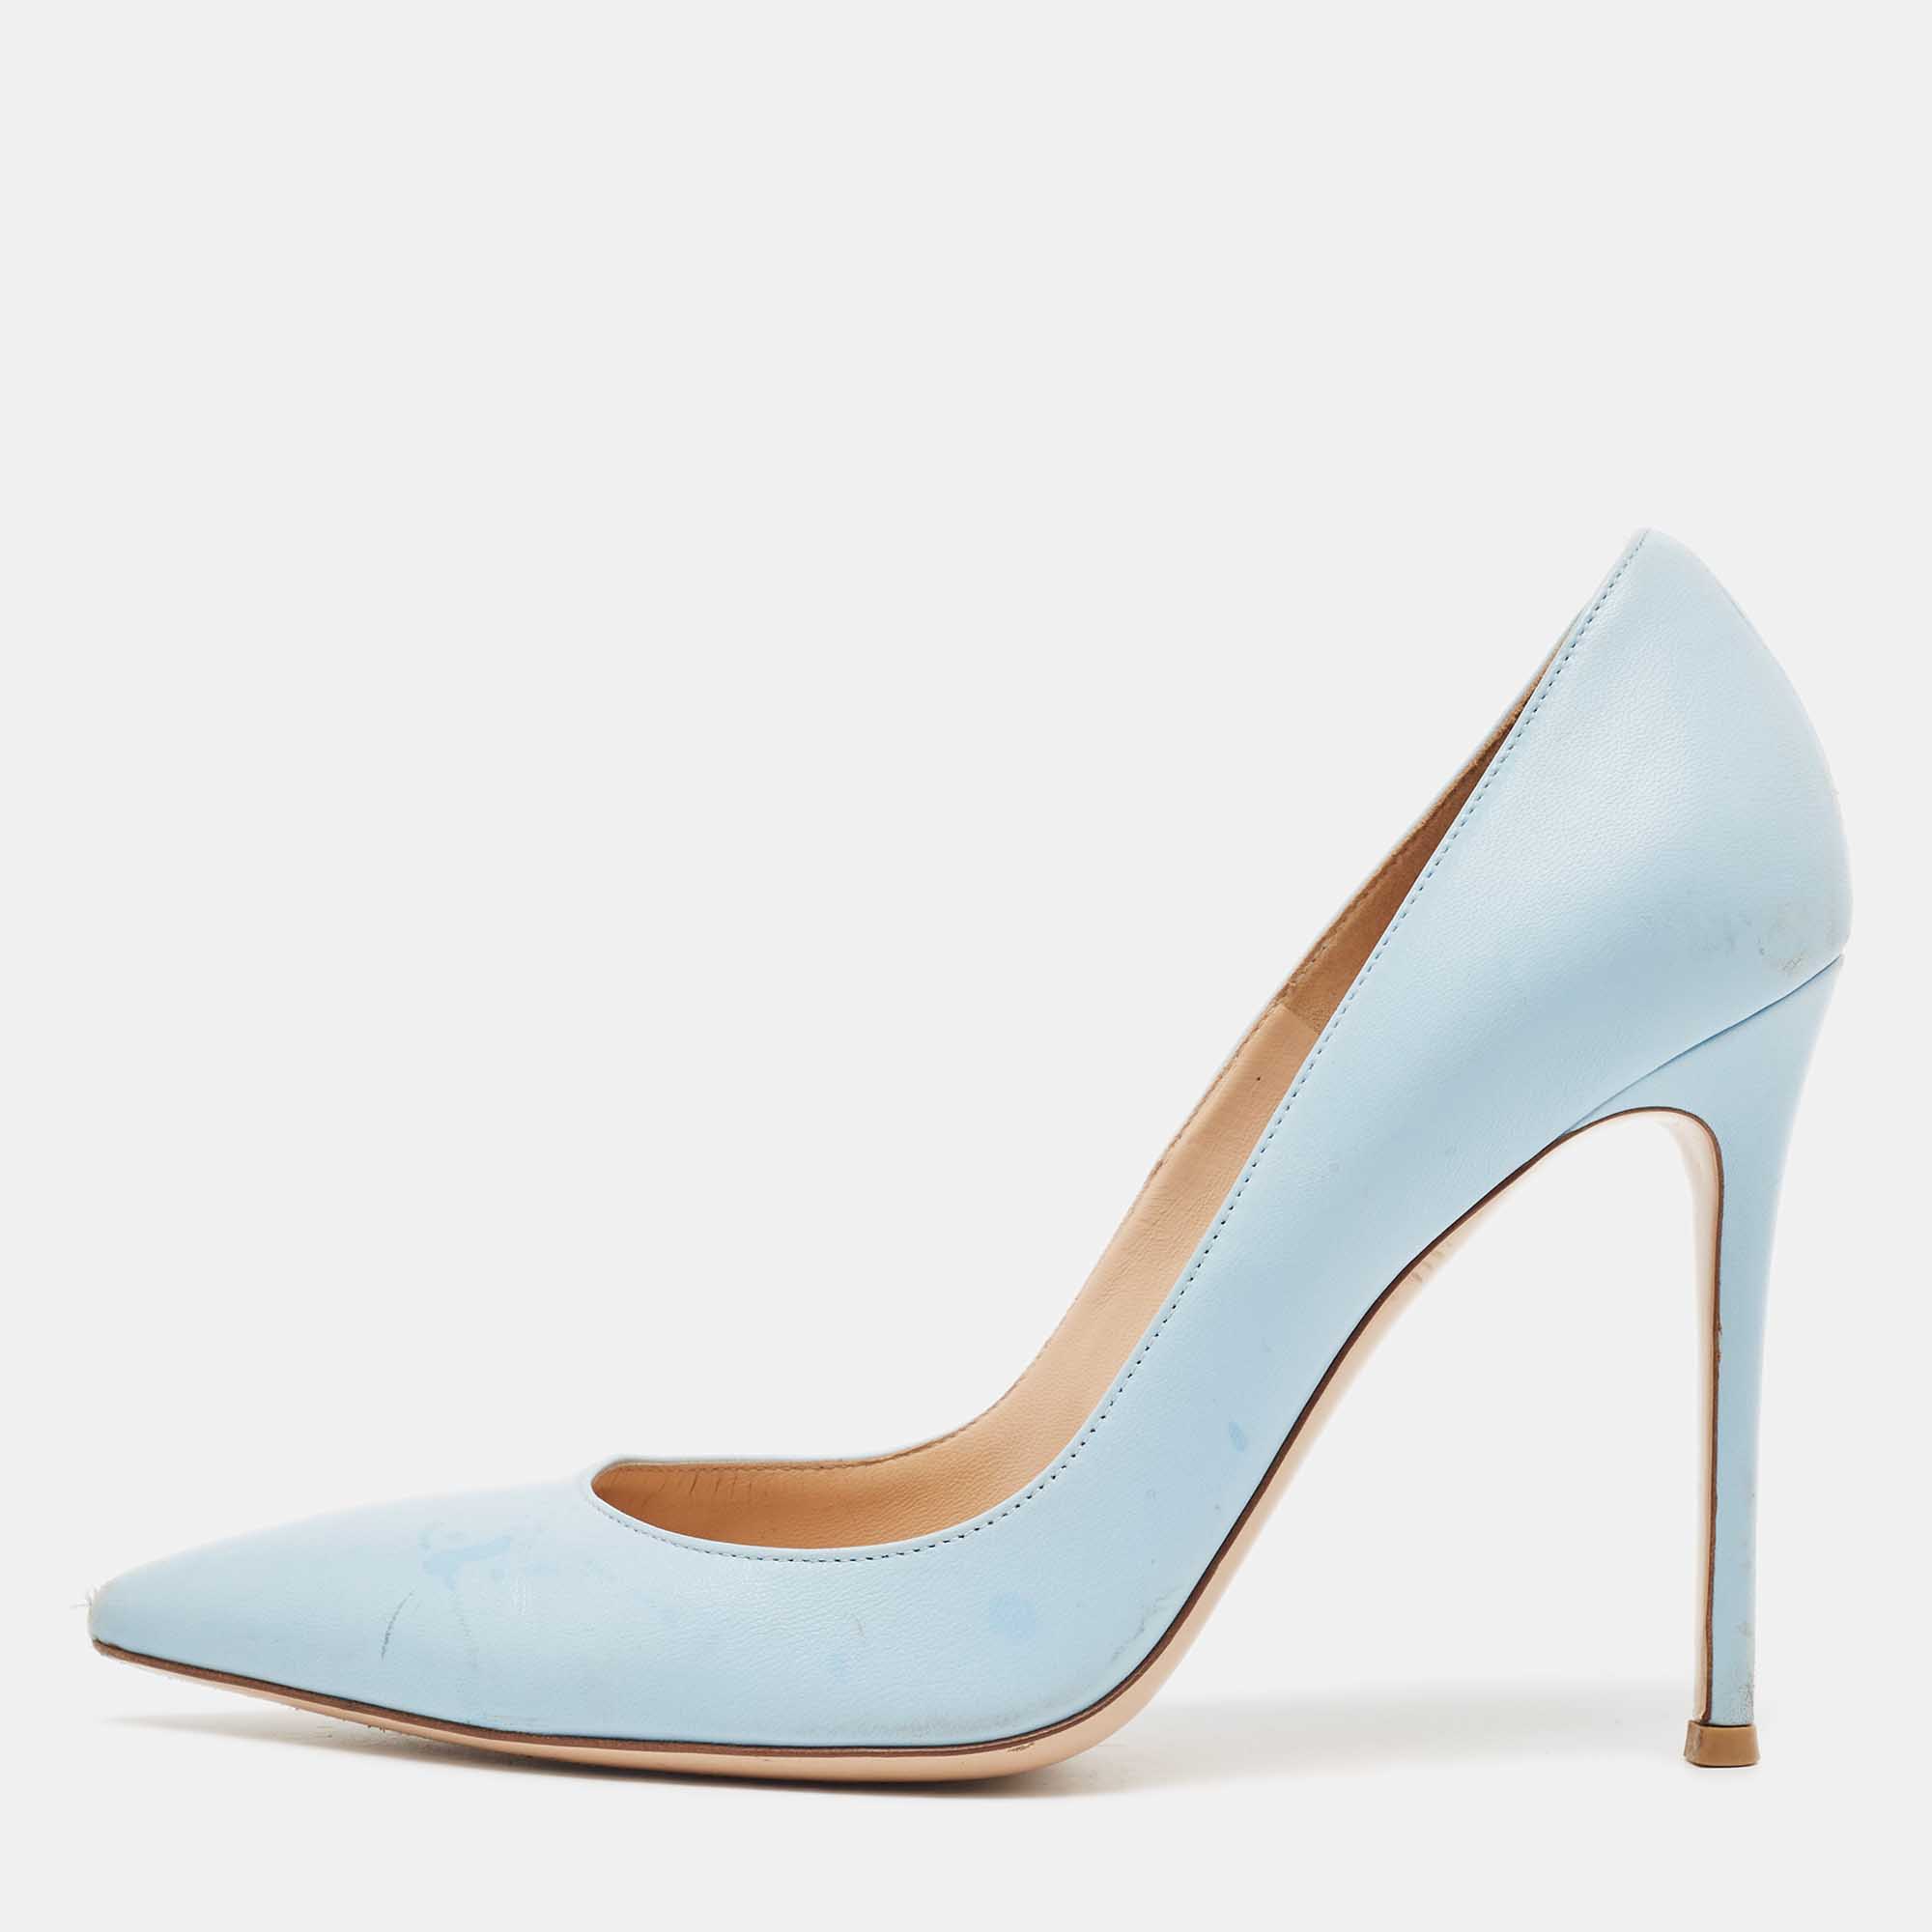 Gianvito rossi light blue leather pointed toe pumps size 39